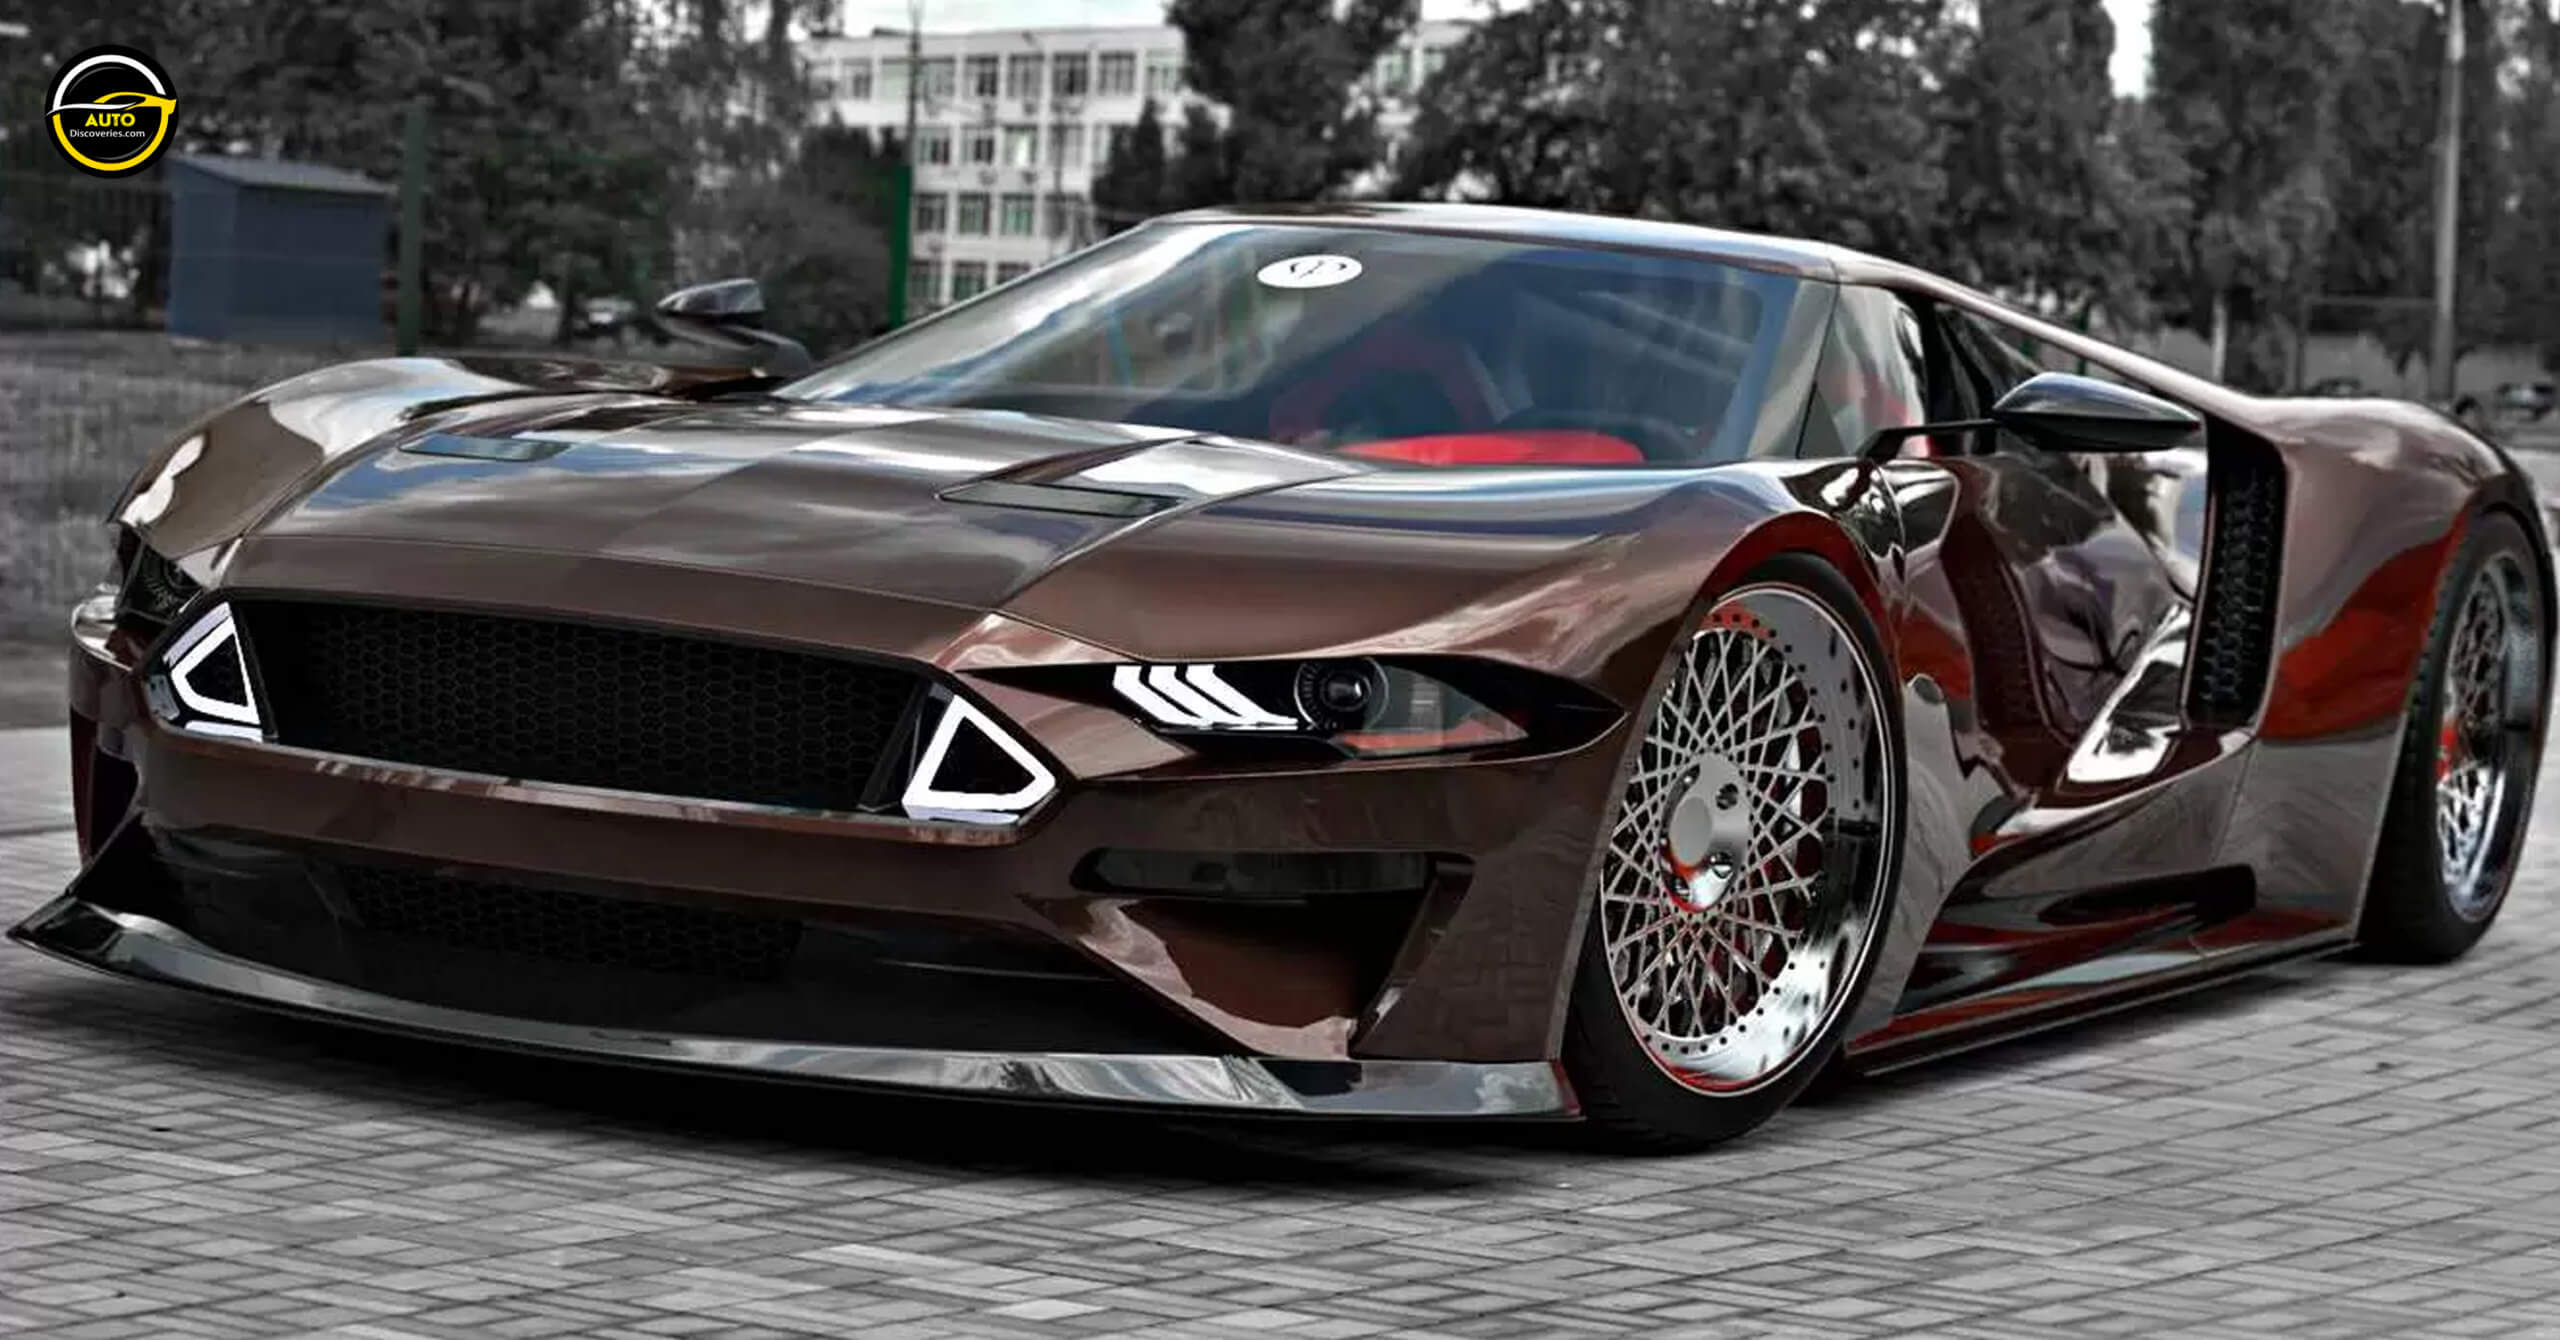 Mustang GT Mid Engine Designed by Rostislav Prokop - Auto Discoveries